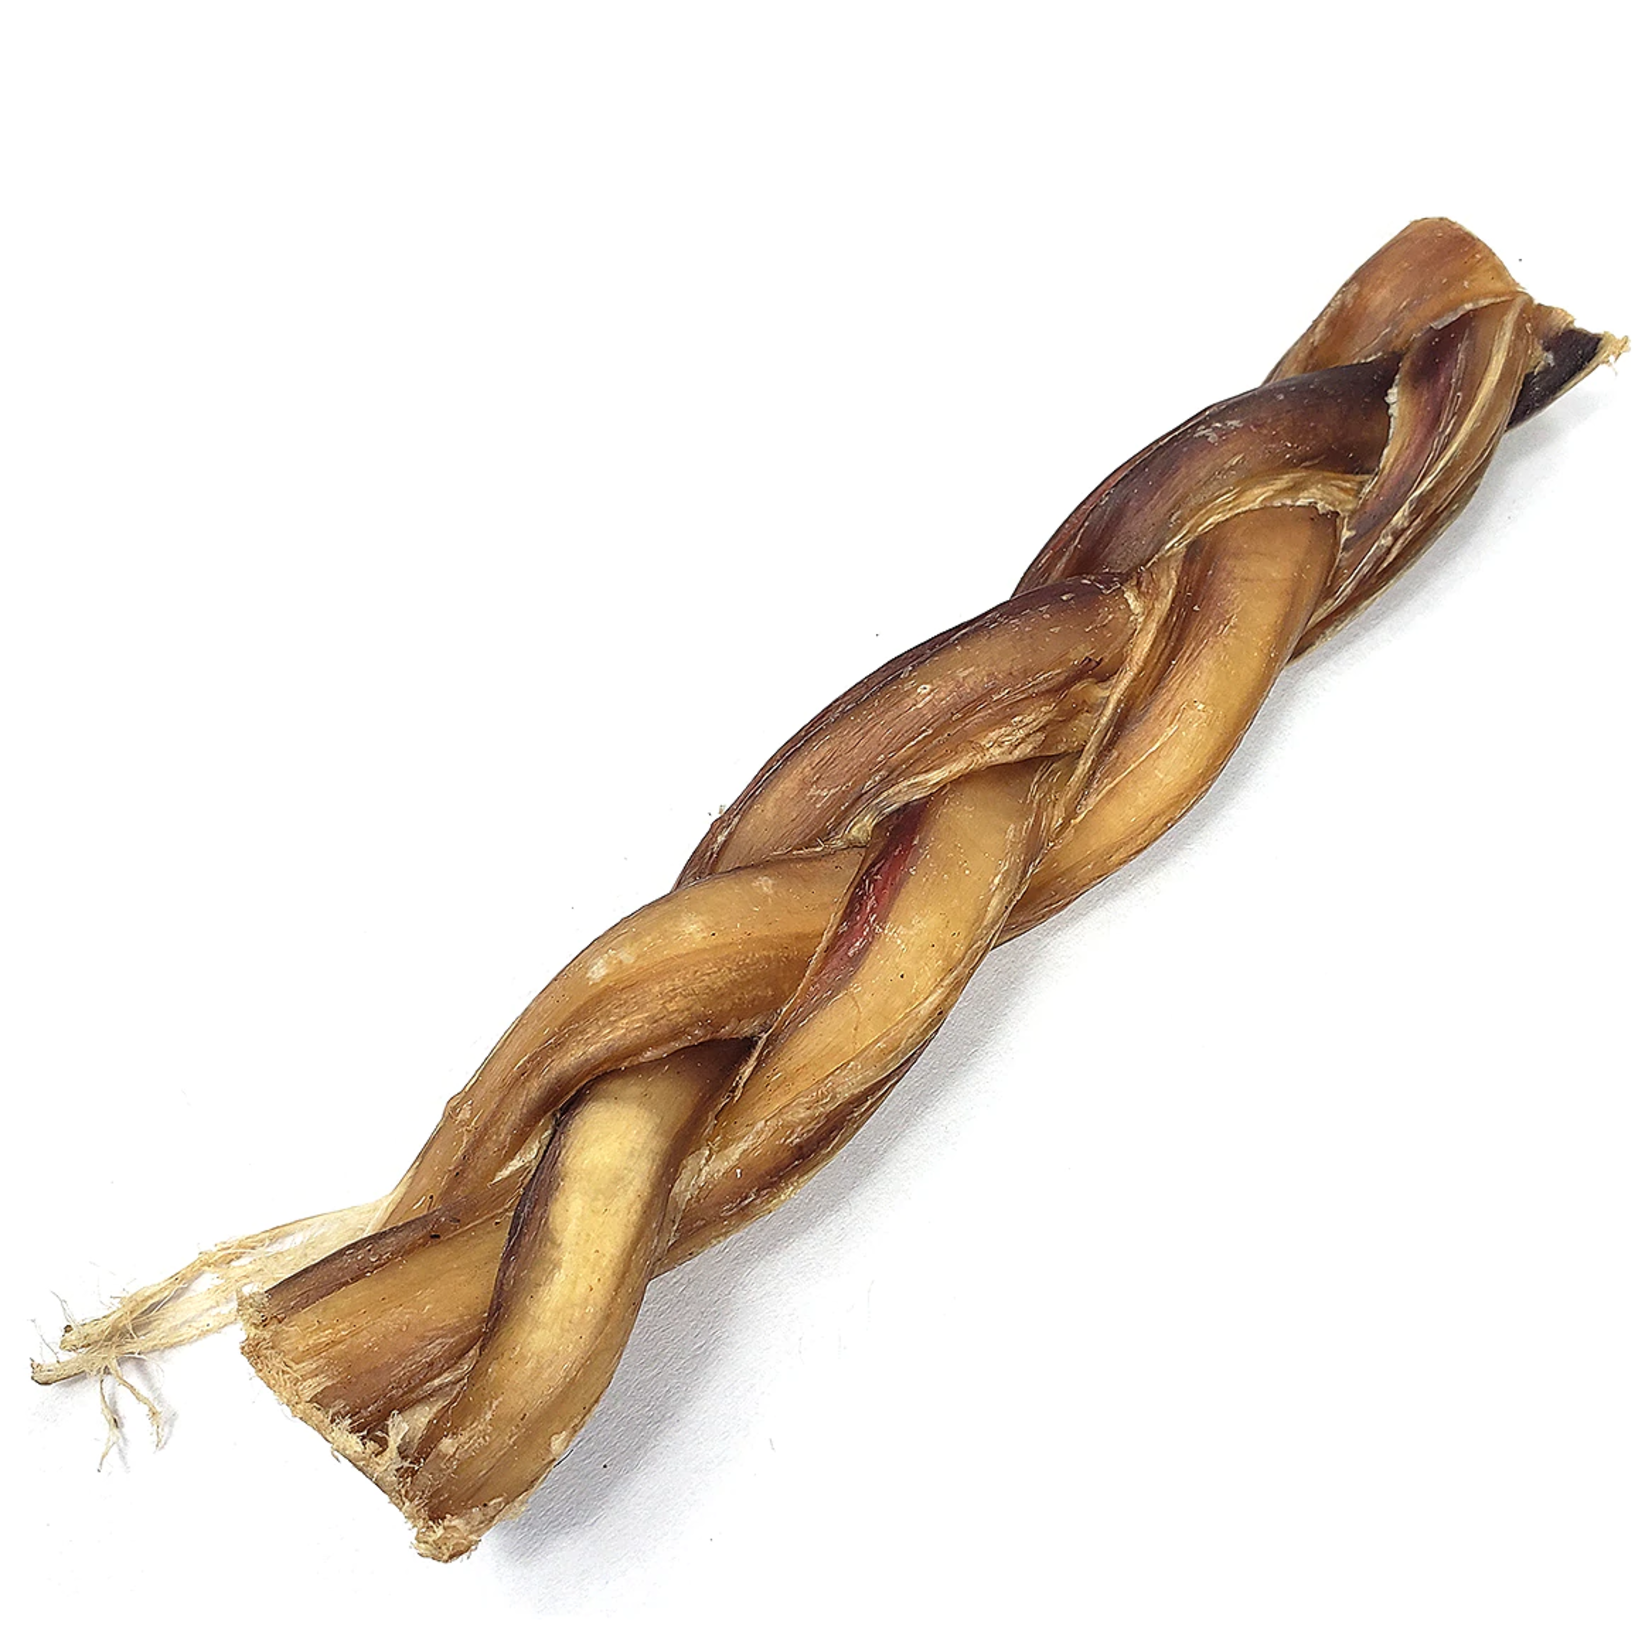 The Natural Dog Company 6" Braided Bully Stick